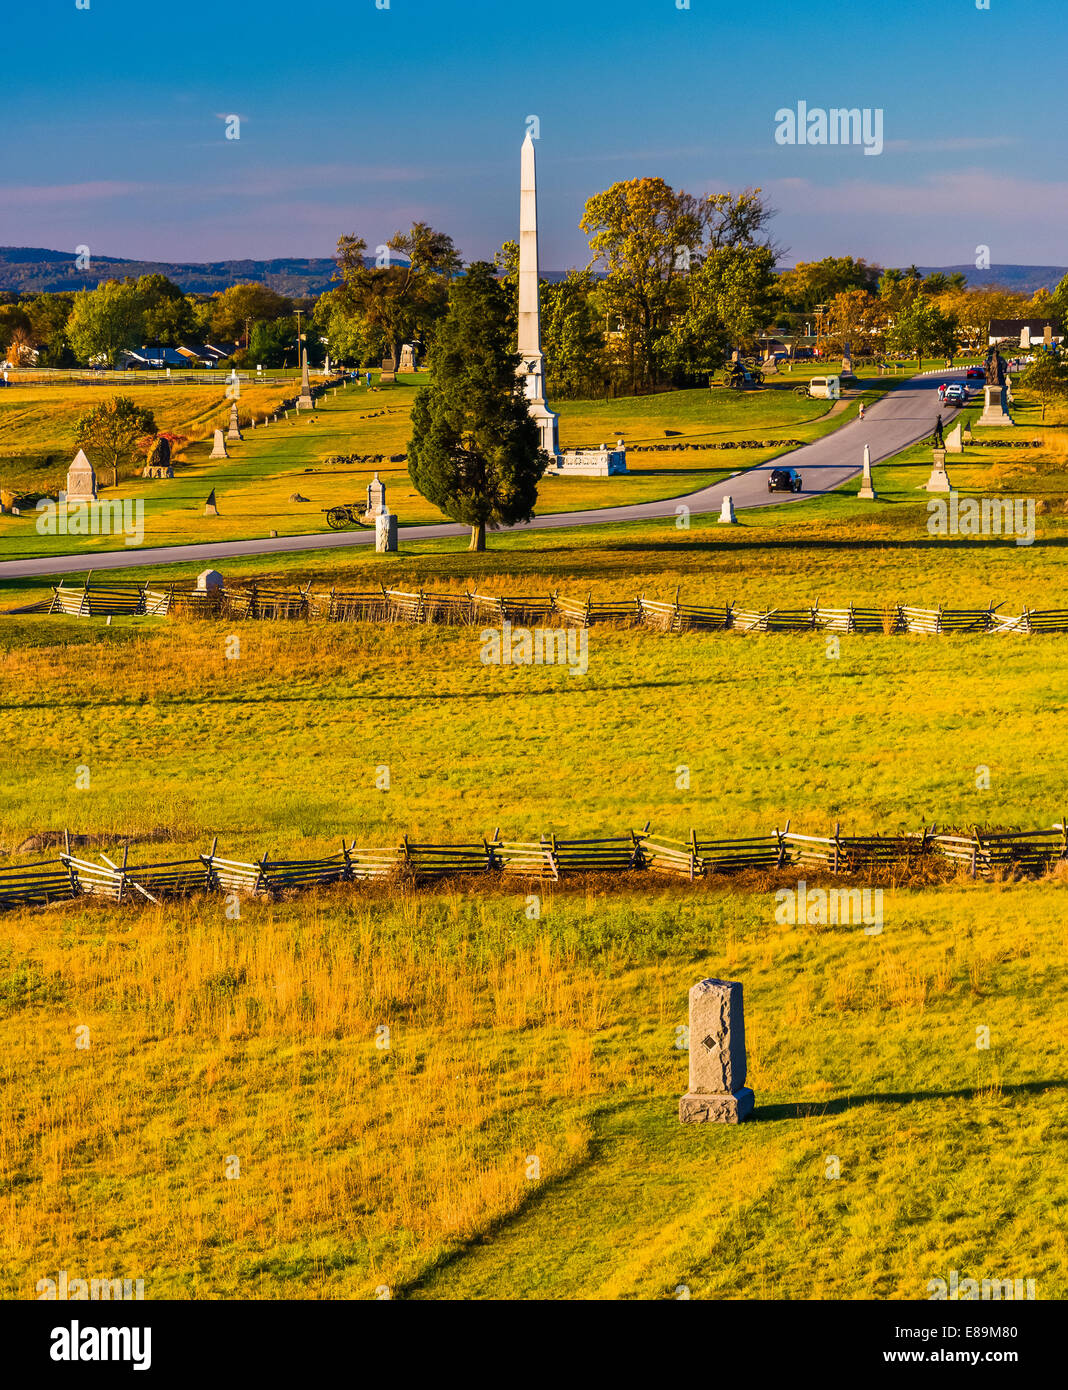 View of battlefields and monuments from the Pennsylvania Monument in Gettysburg, Pennsylvania. Stock Photo